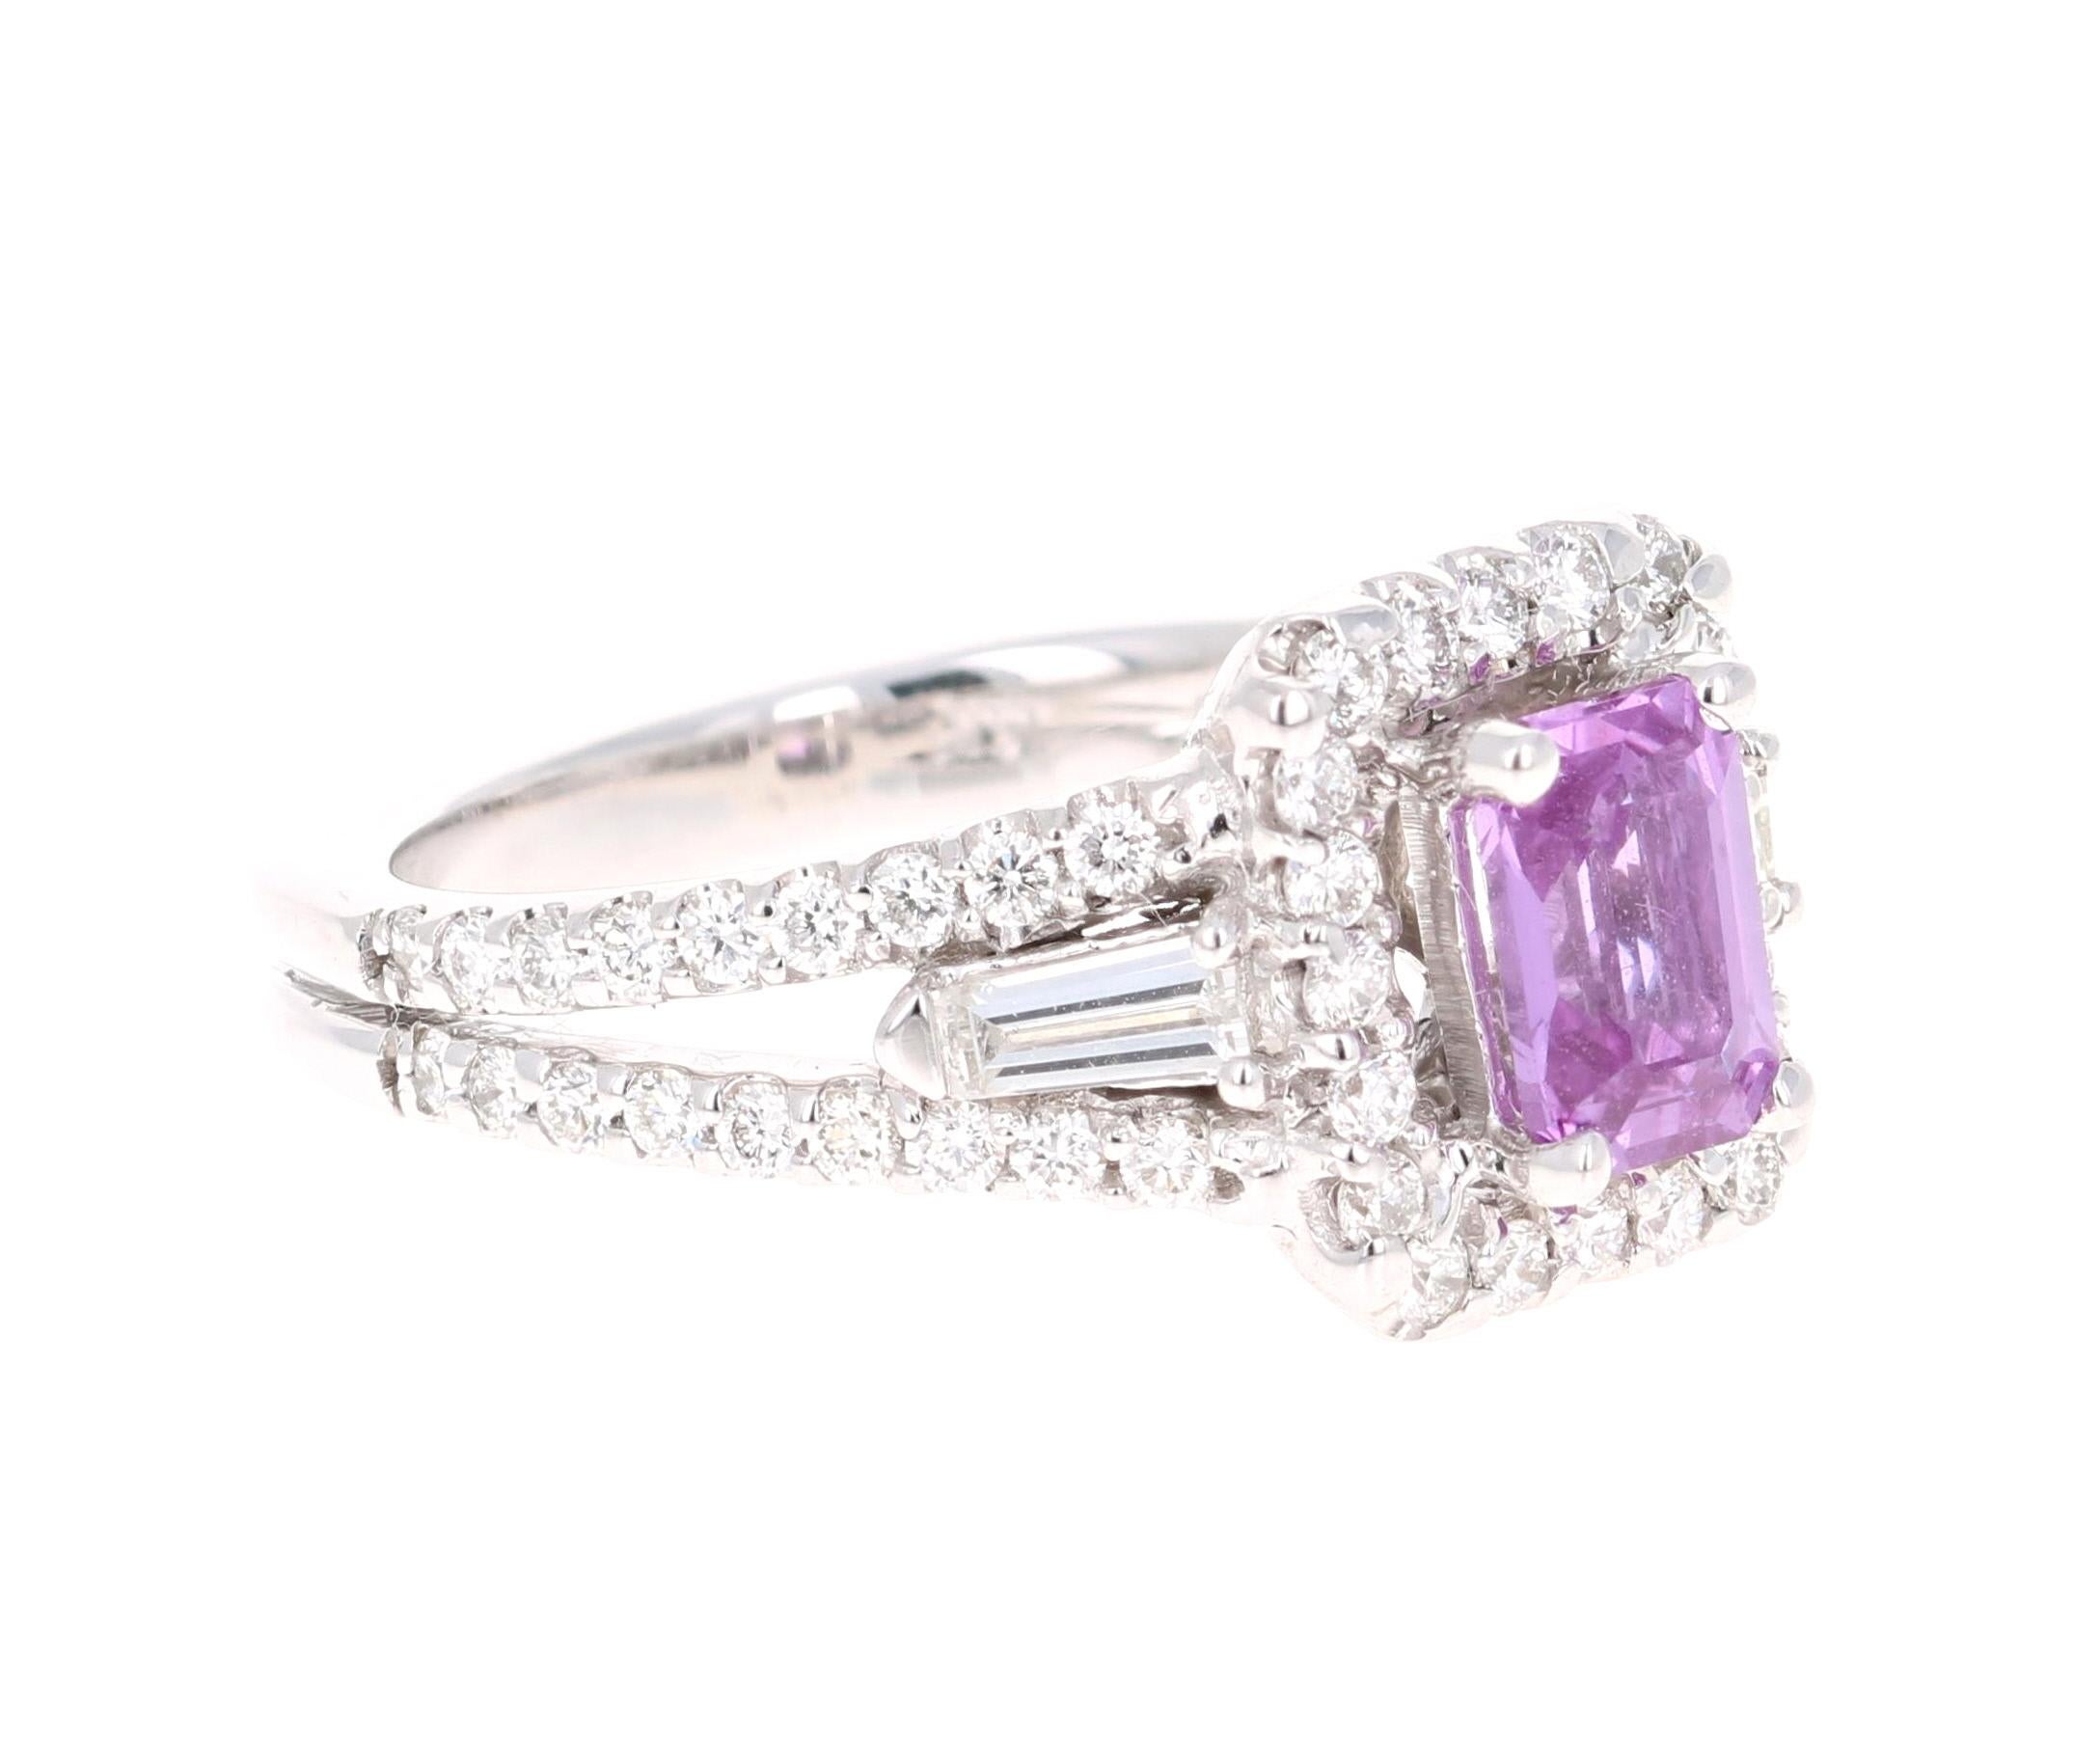 Pink Sapphire and Diamond Ring! Can be an everyday ring or a unique Engagement Ring!

This beautiful ring has a Emerald Cut Pink Sapphire that weights 1.17 Carats. It is completely natural and has not been heated. The GIA Certificate Number is: